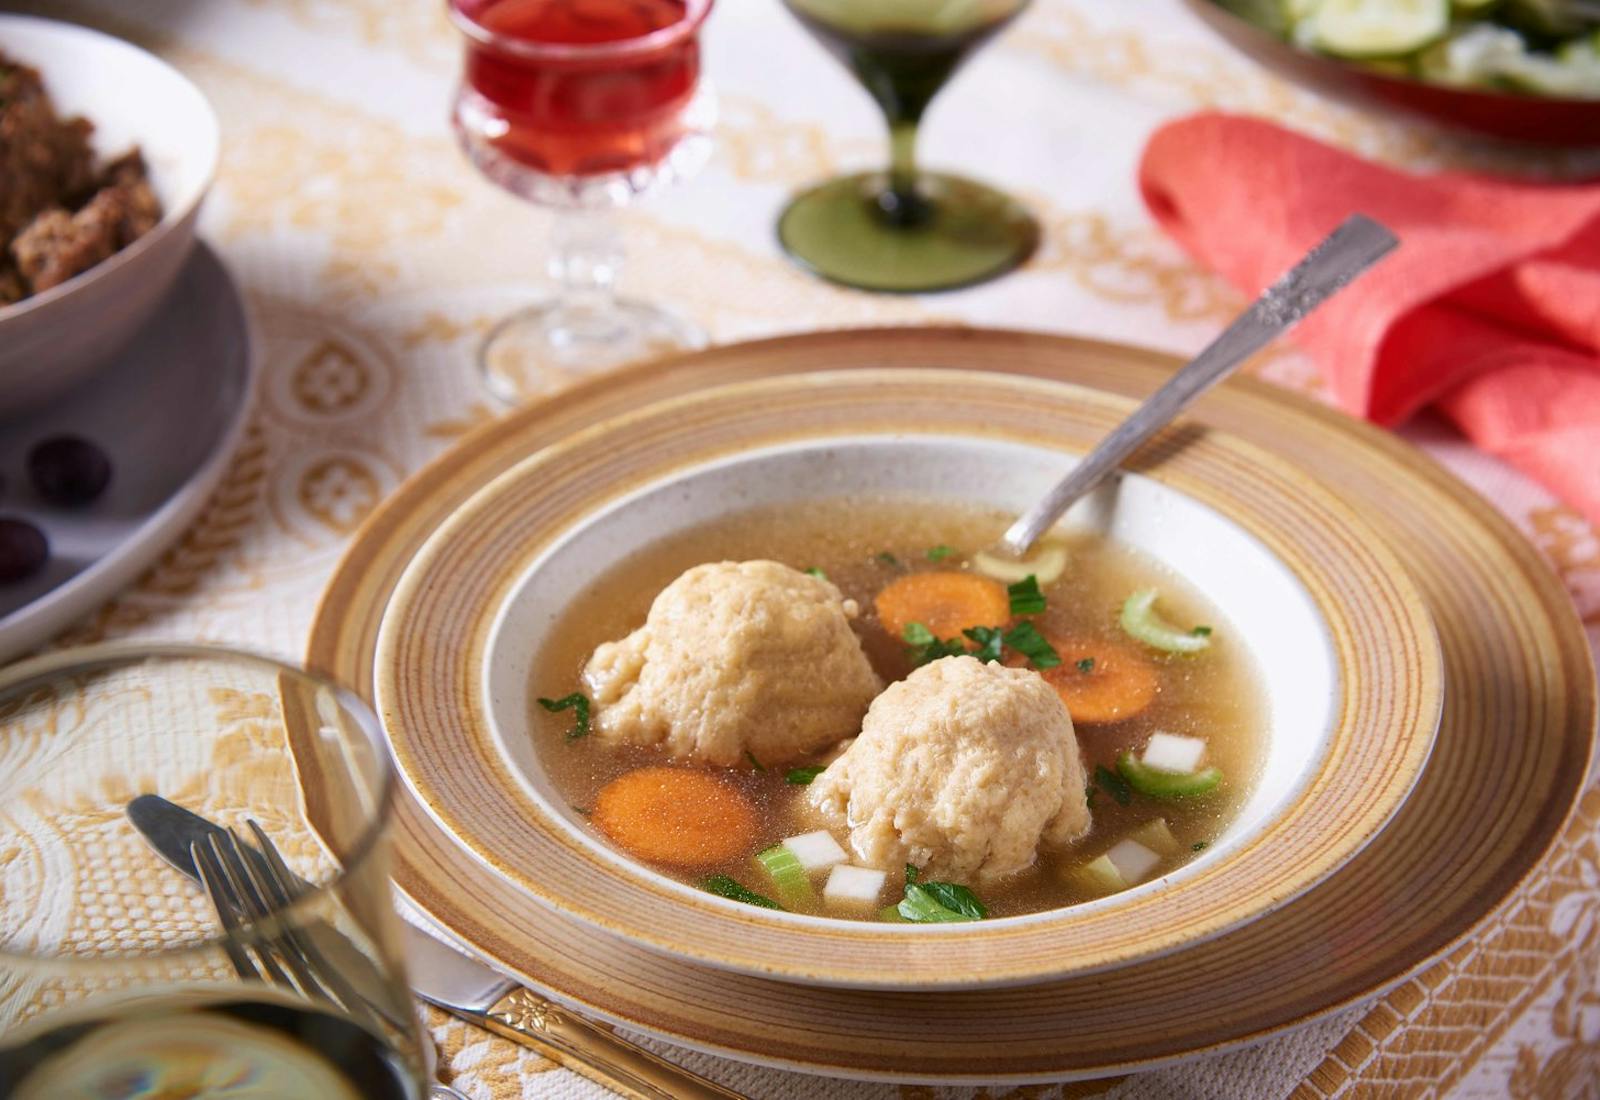 Serving of matzo ball soup in brown-rimmed bowl atop matching plate, alongside glasses of wine and pink napkin.